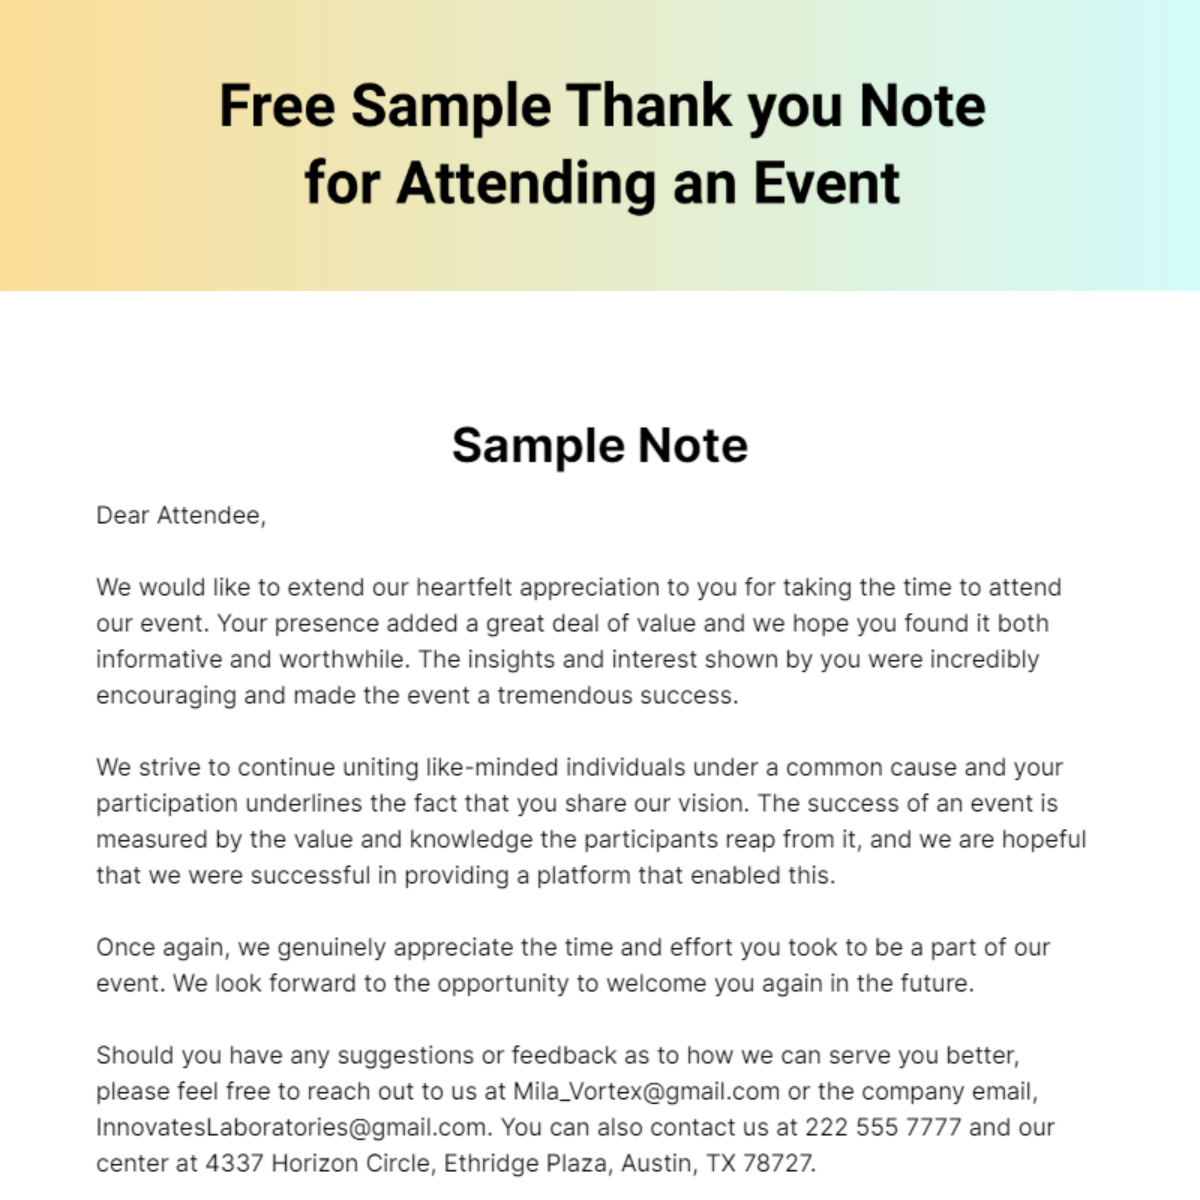 Free Sample Thank you Note for Attending an Event Template